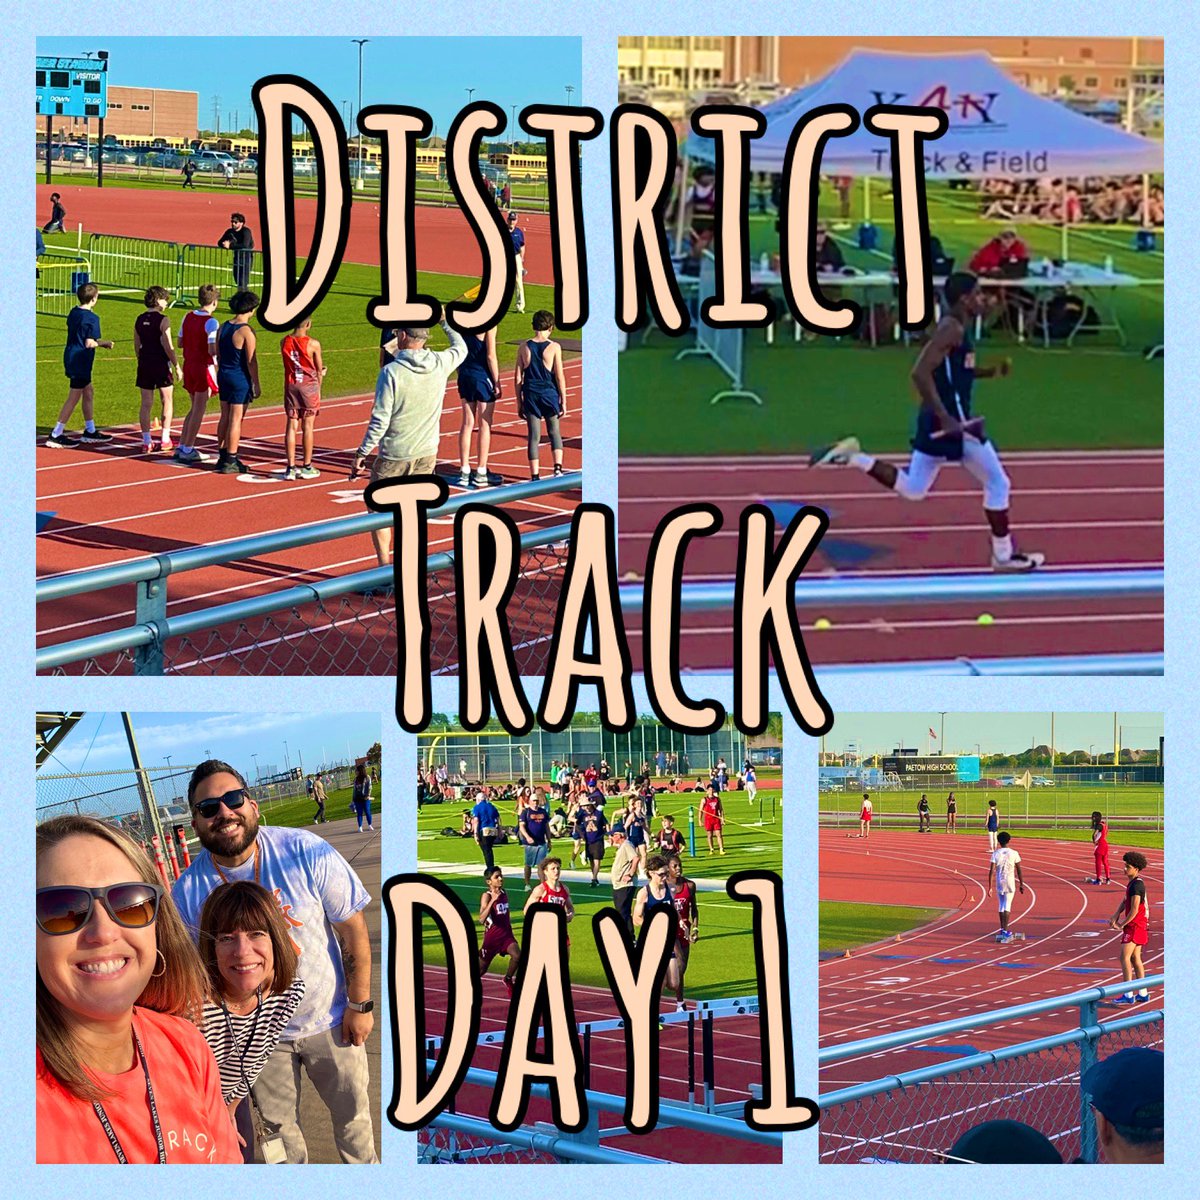 Couldn’t have asked for better weather tonight. Congrats to all those who earned a spot! 🧡💙👟💨 @spartan_speak #7LJHpride @PollyDusek @LCantuAP @SL_Athletics @SLBoysAthletics